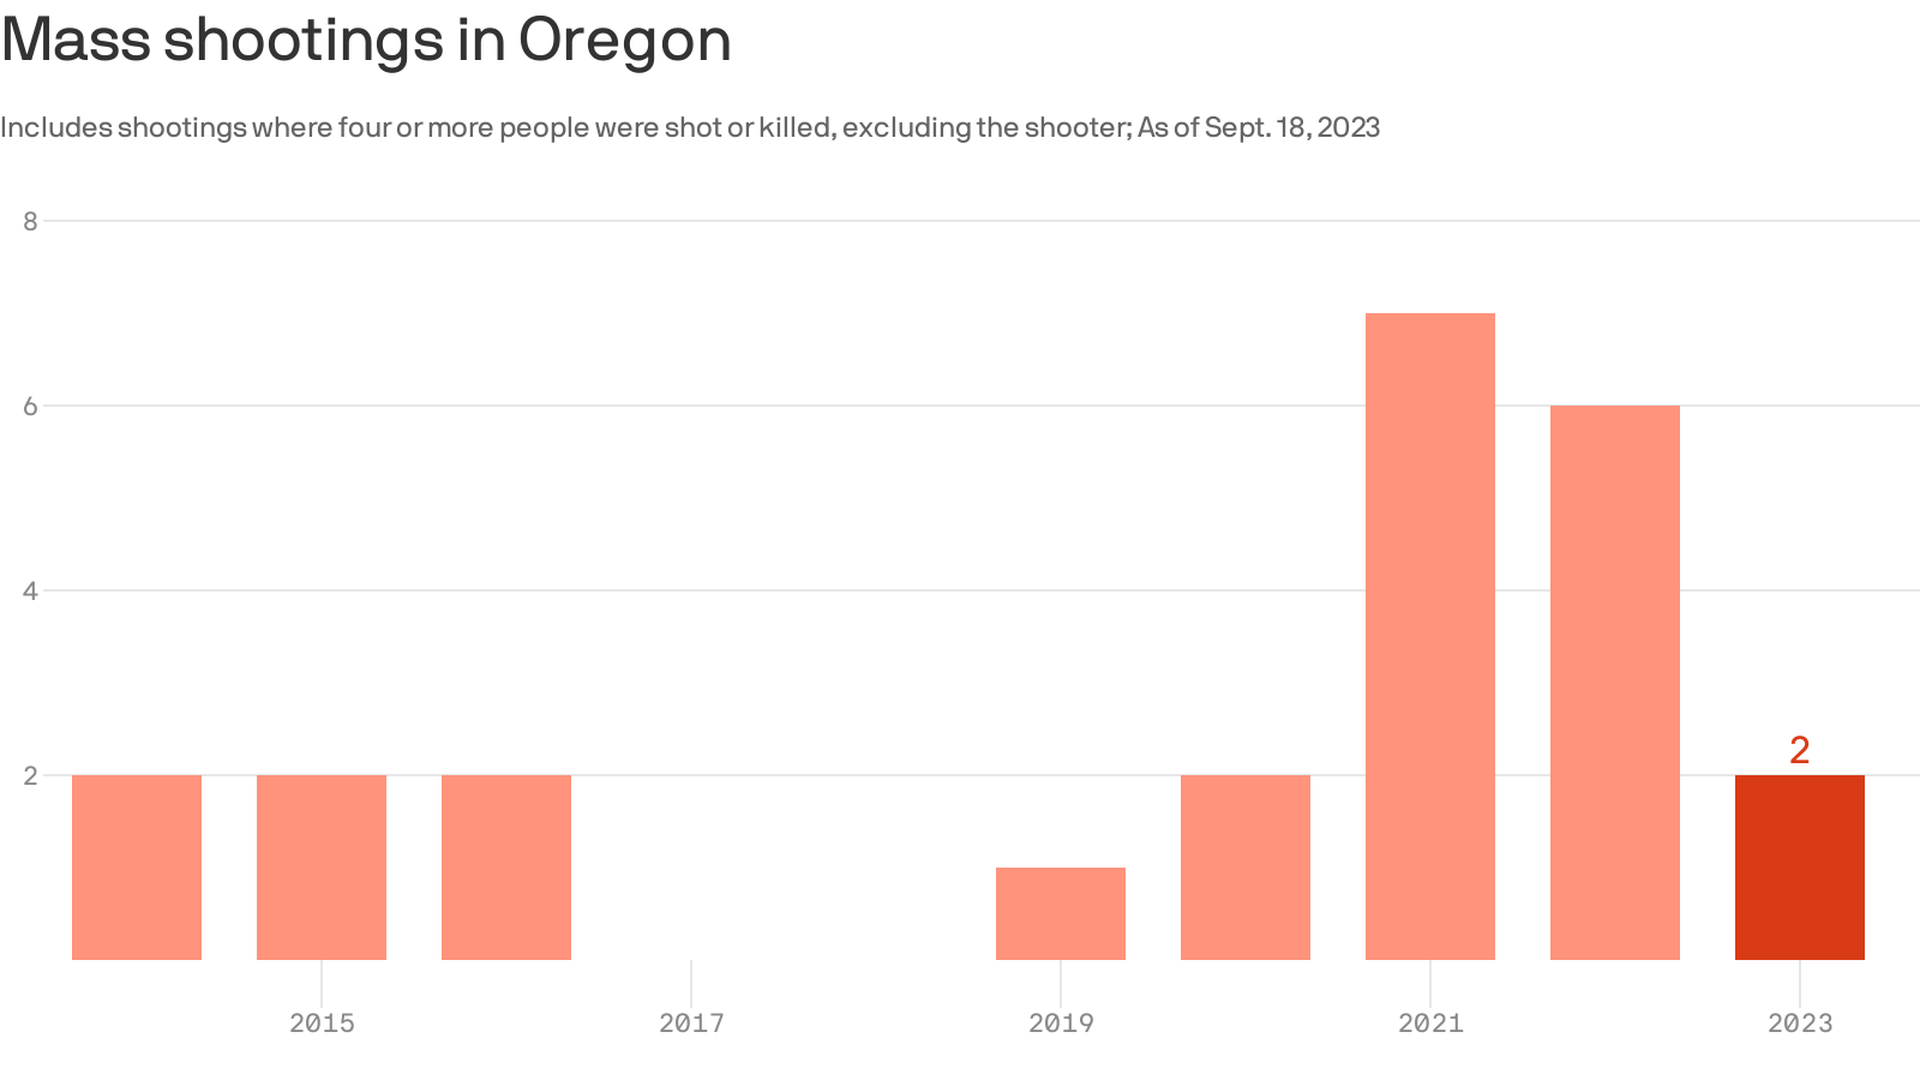 A bar chart showing a spike in mass shootings in Oregon in 2021 with 7, then two years of drop to 2 so far in 2023.